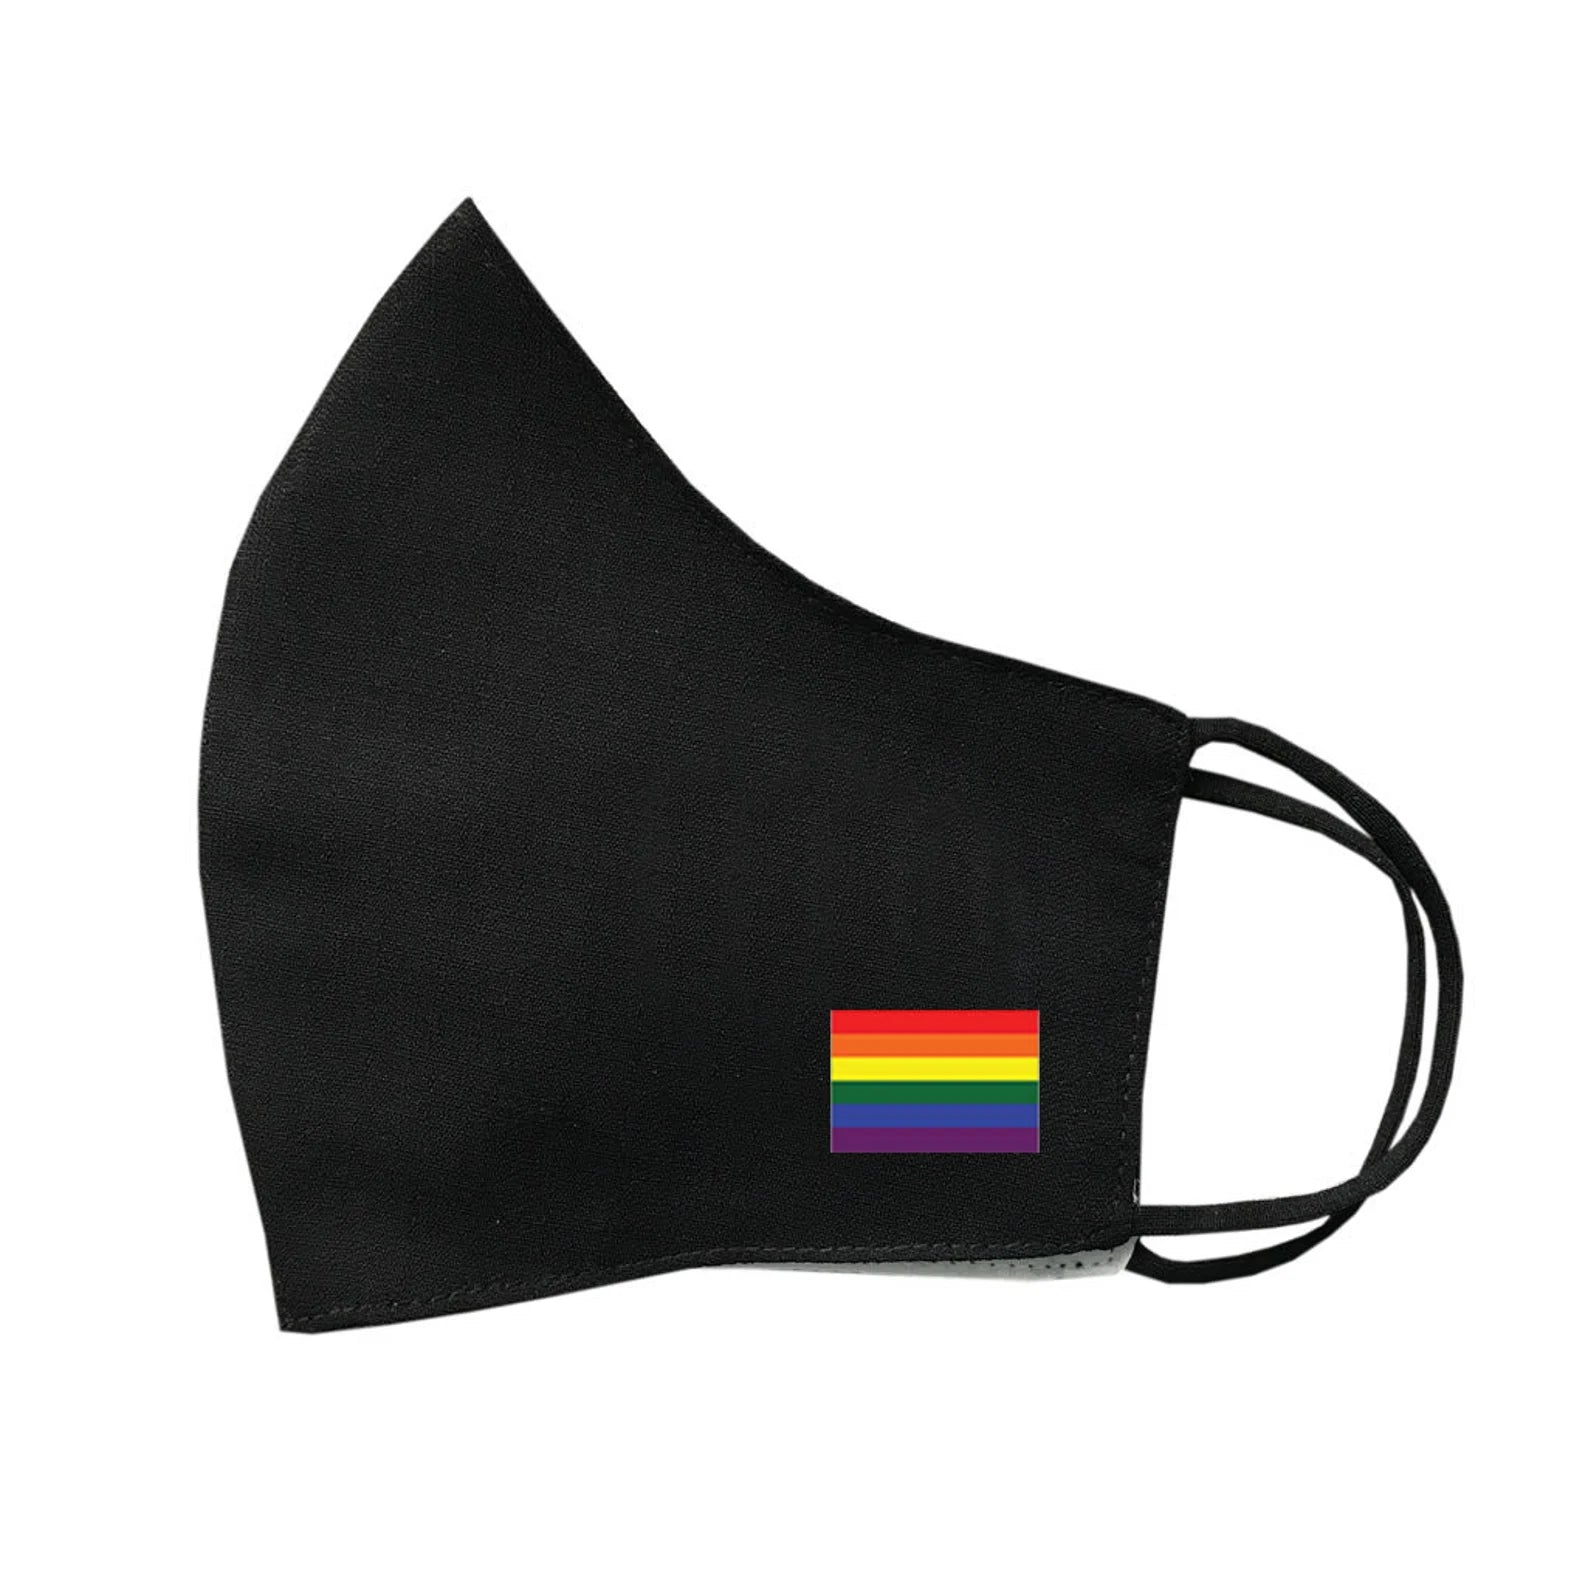 LGBT Flag Mask - 19.99 with free shipping on Gays+ Store 